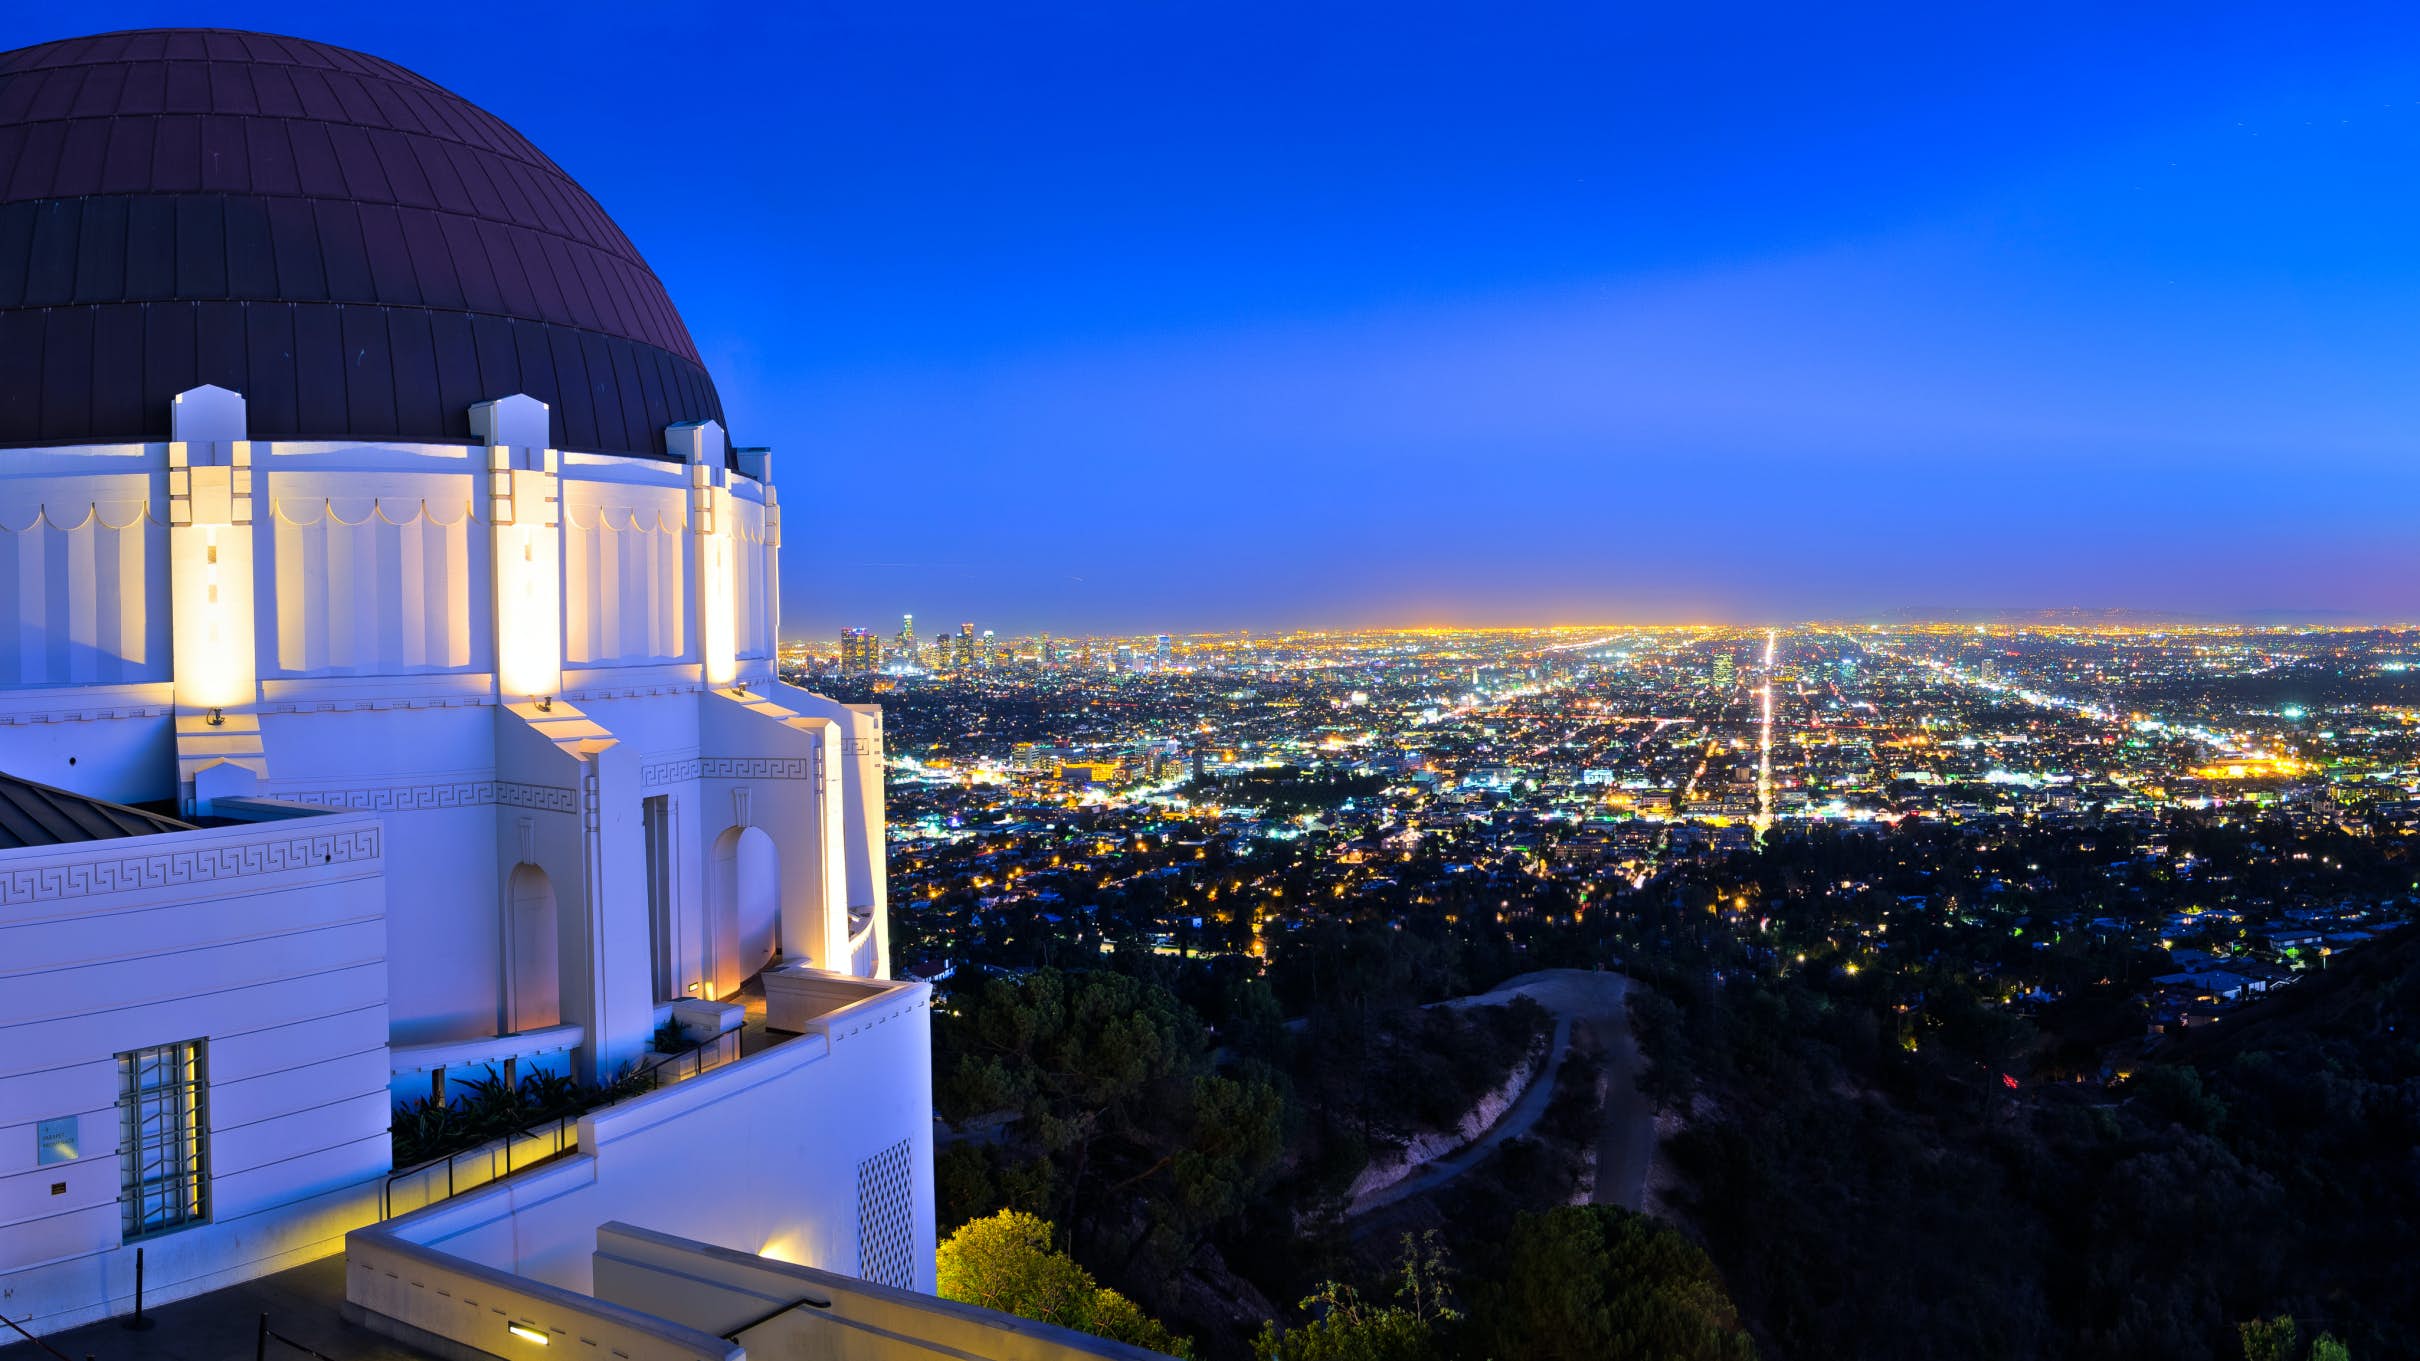 Sky Report - Griffith Observatory - Southern California's gateway